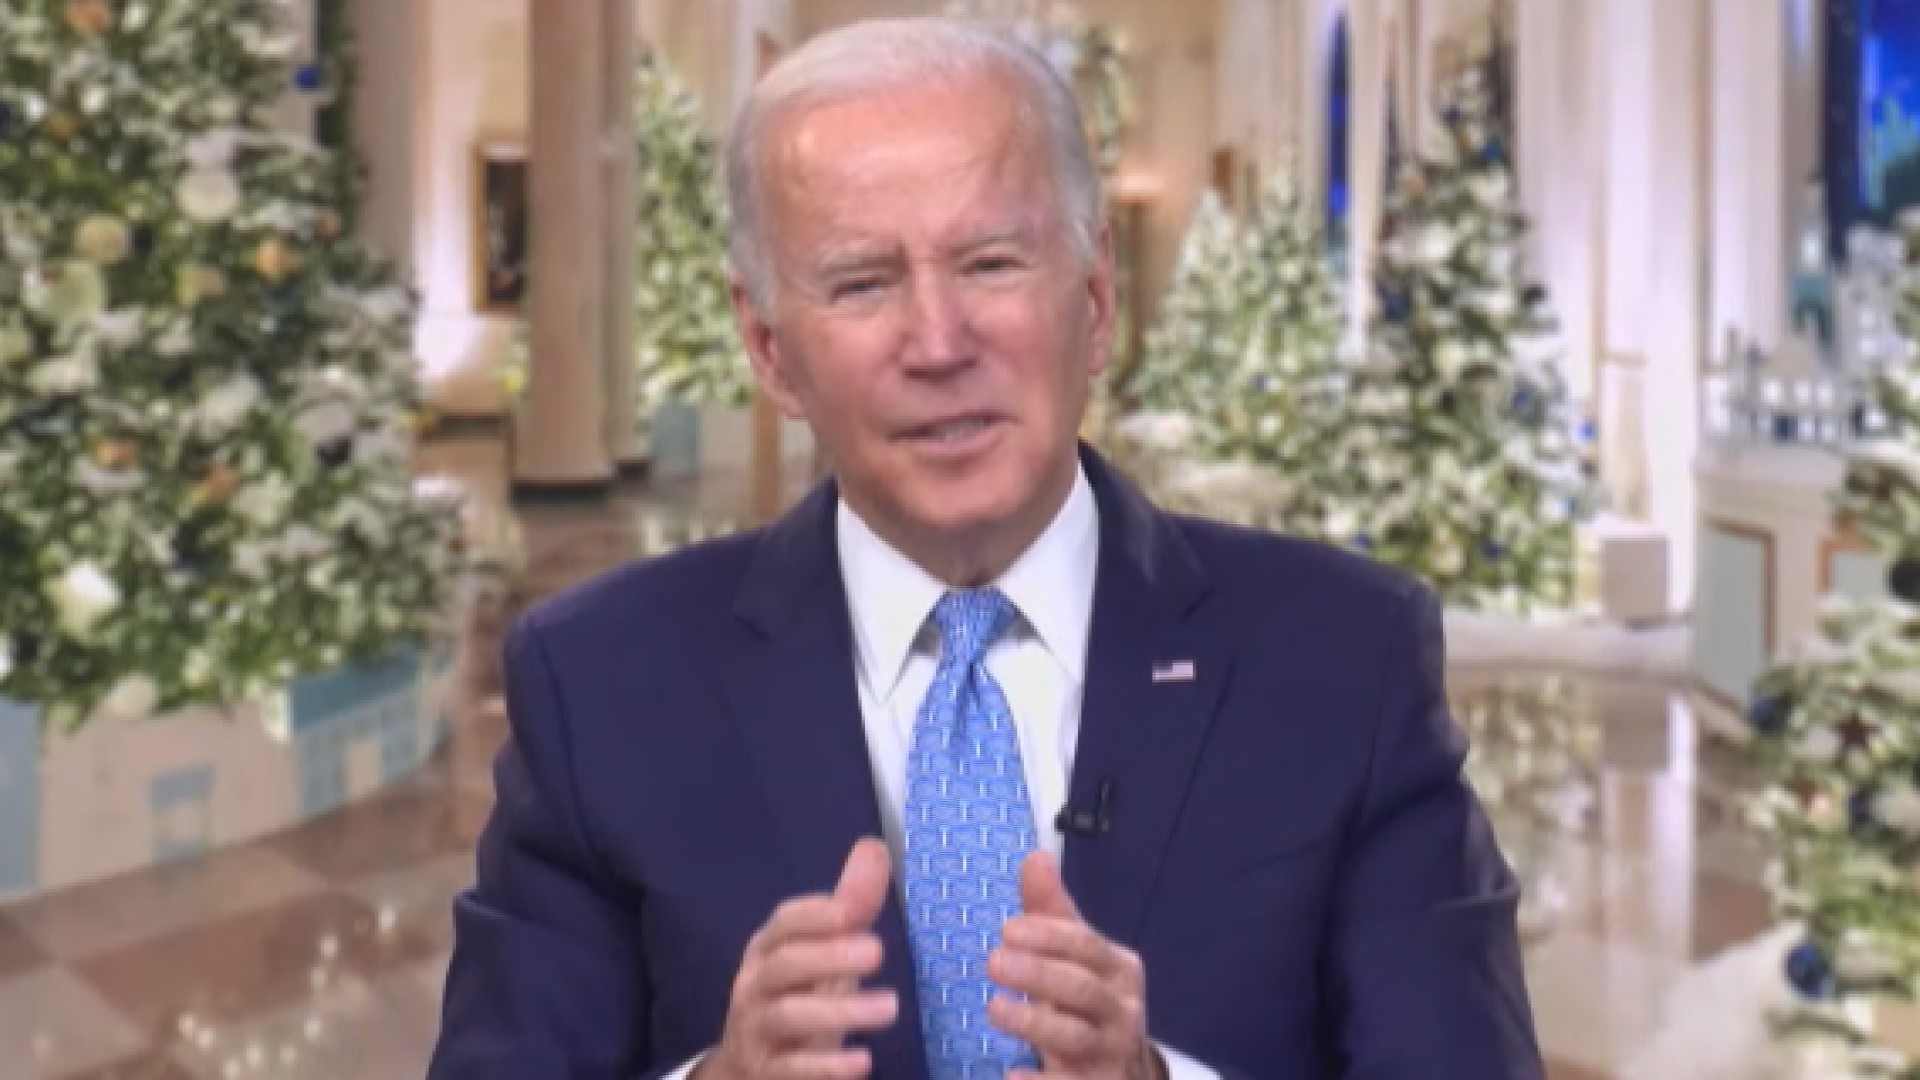 President Joe Biden discusses supply chain issues, gas prices, and the need to come together.